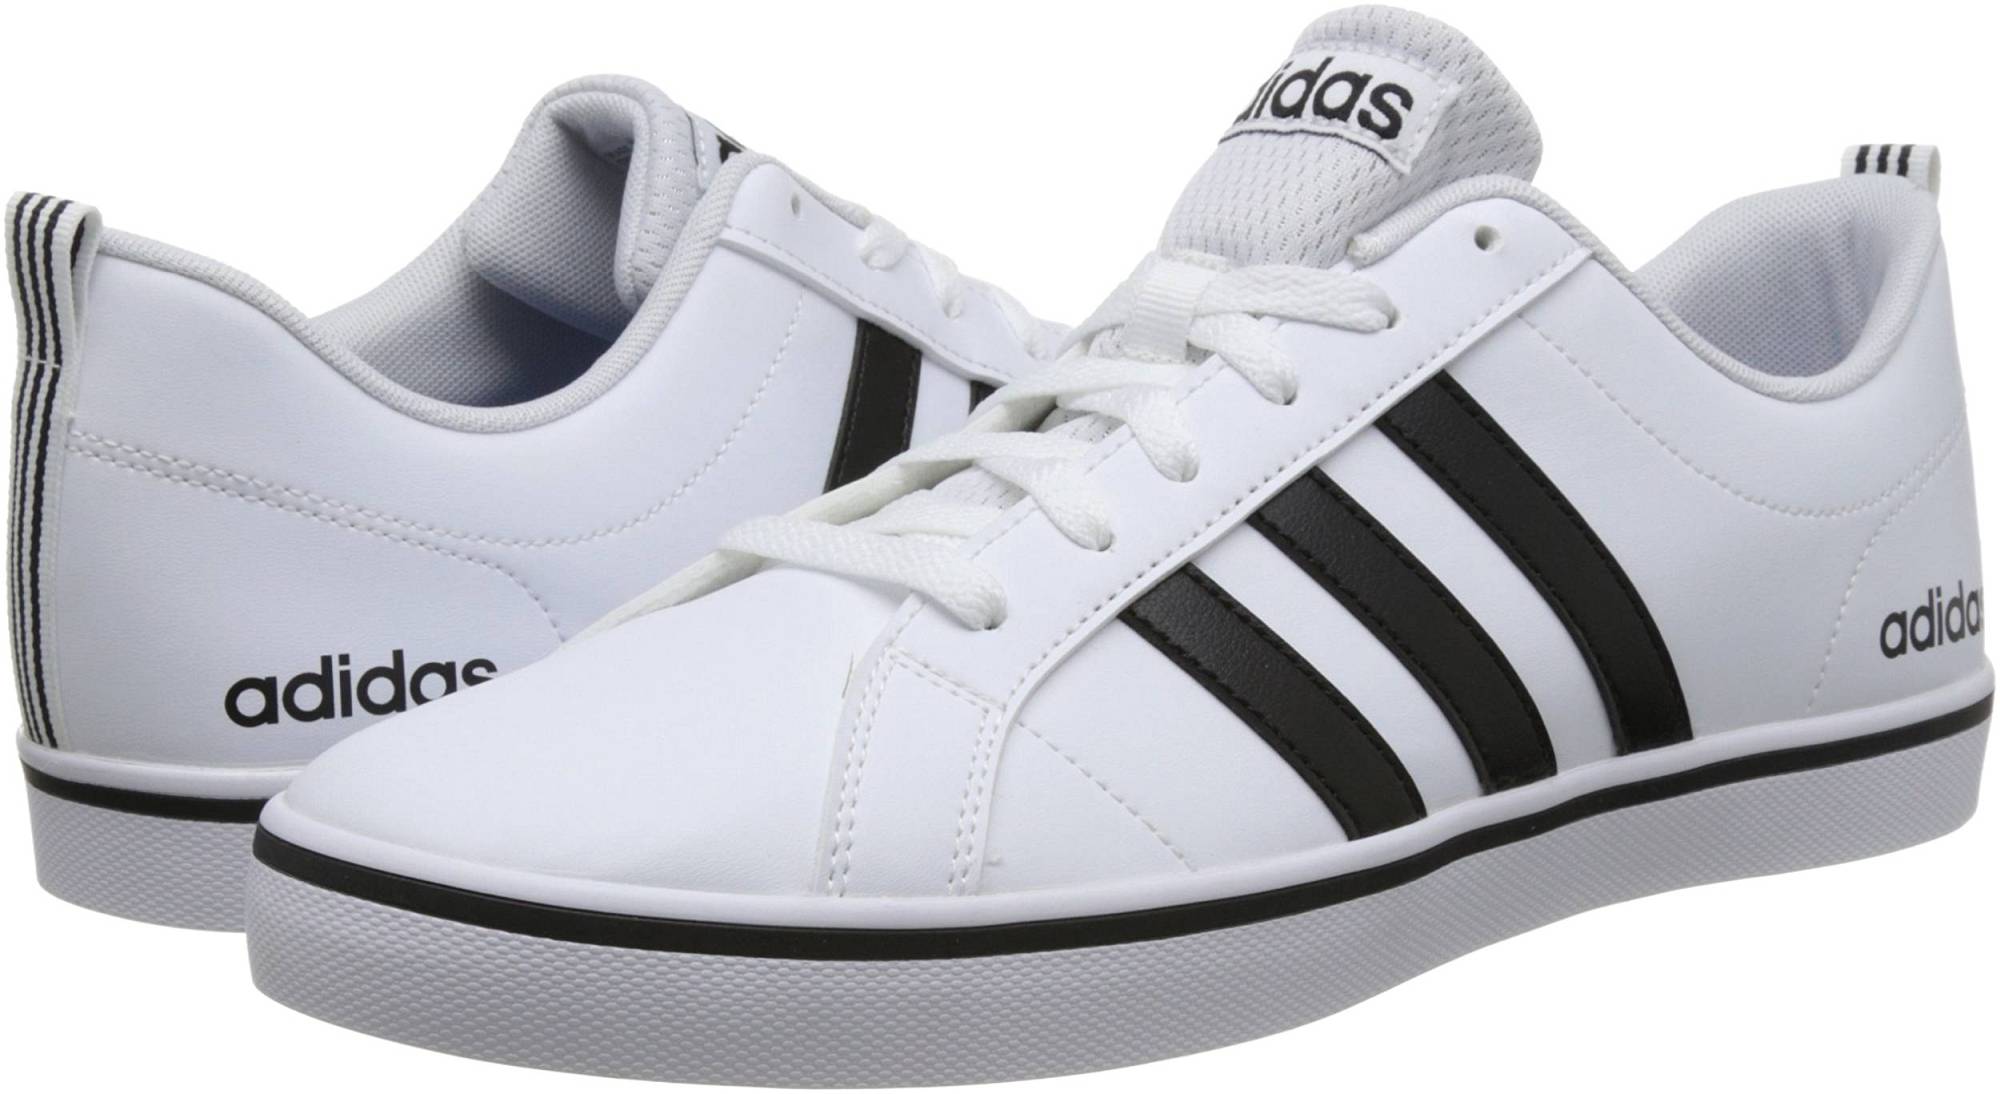 Adidas VS Pace – Shoes Reviews & Reasons To Buy